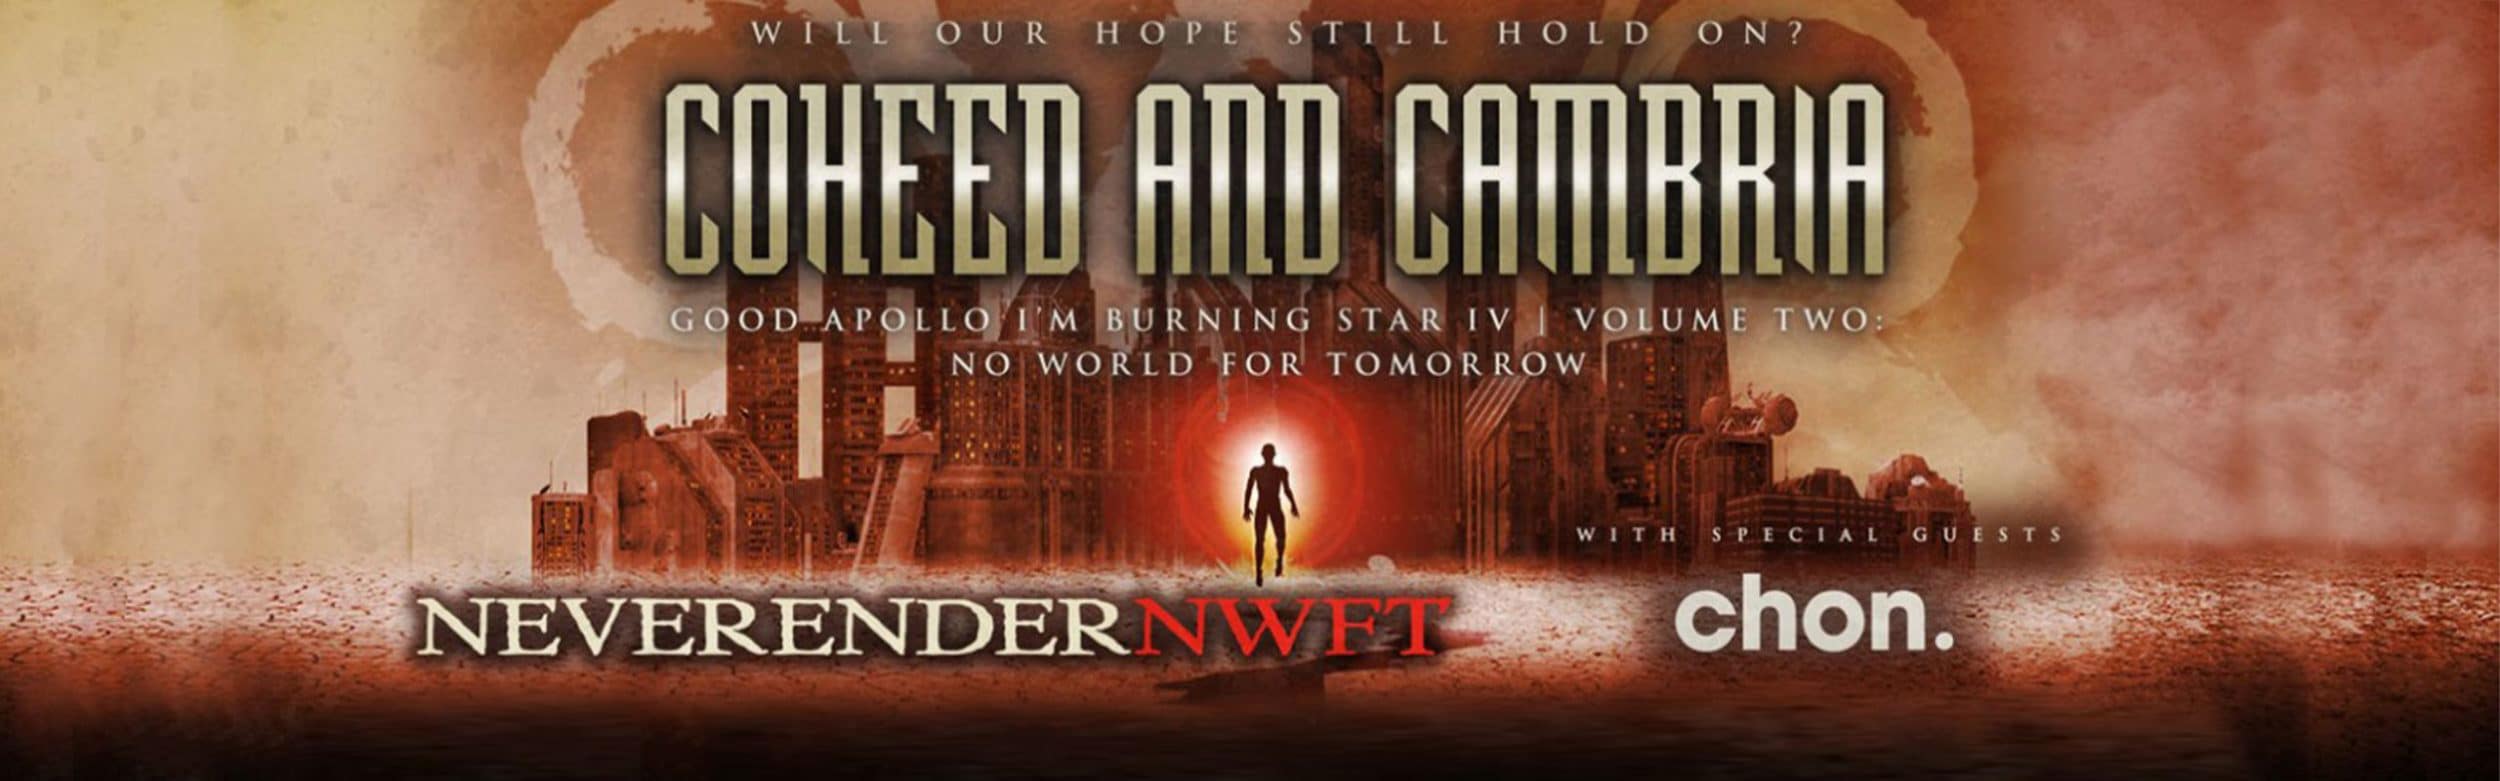 Coheed and Cambria – Neverender: NWFT w/ Special Guest Chon